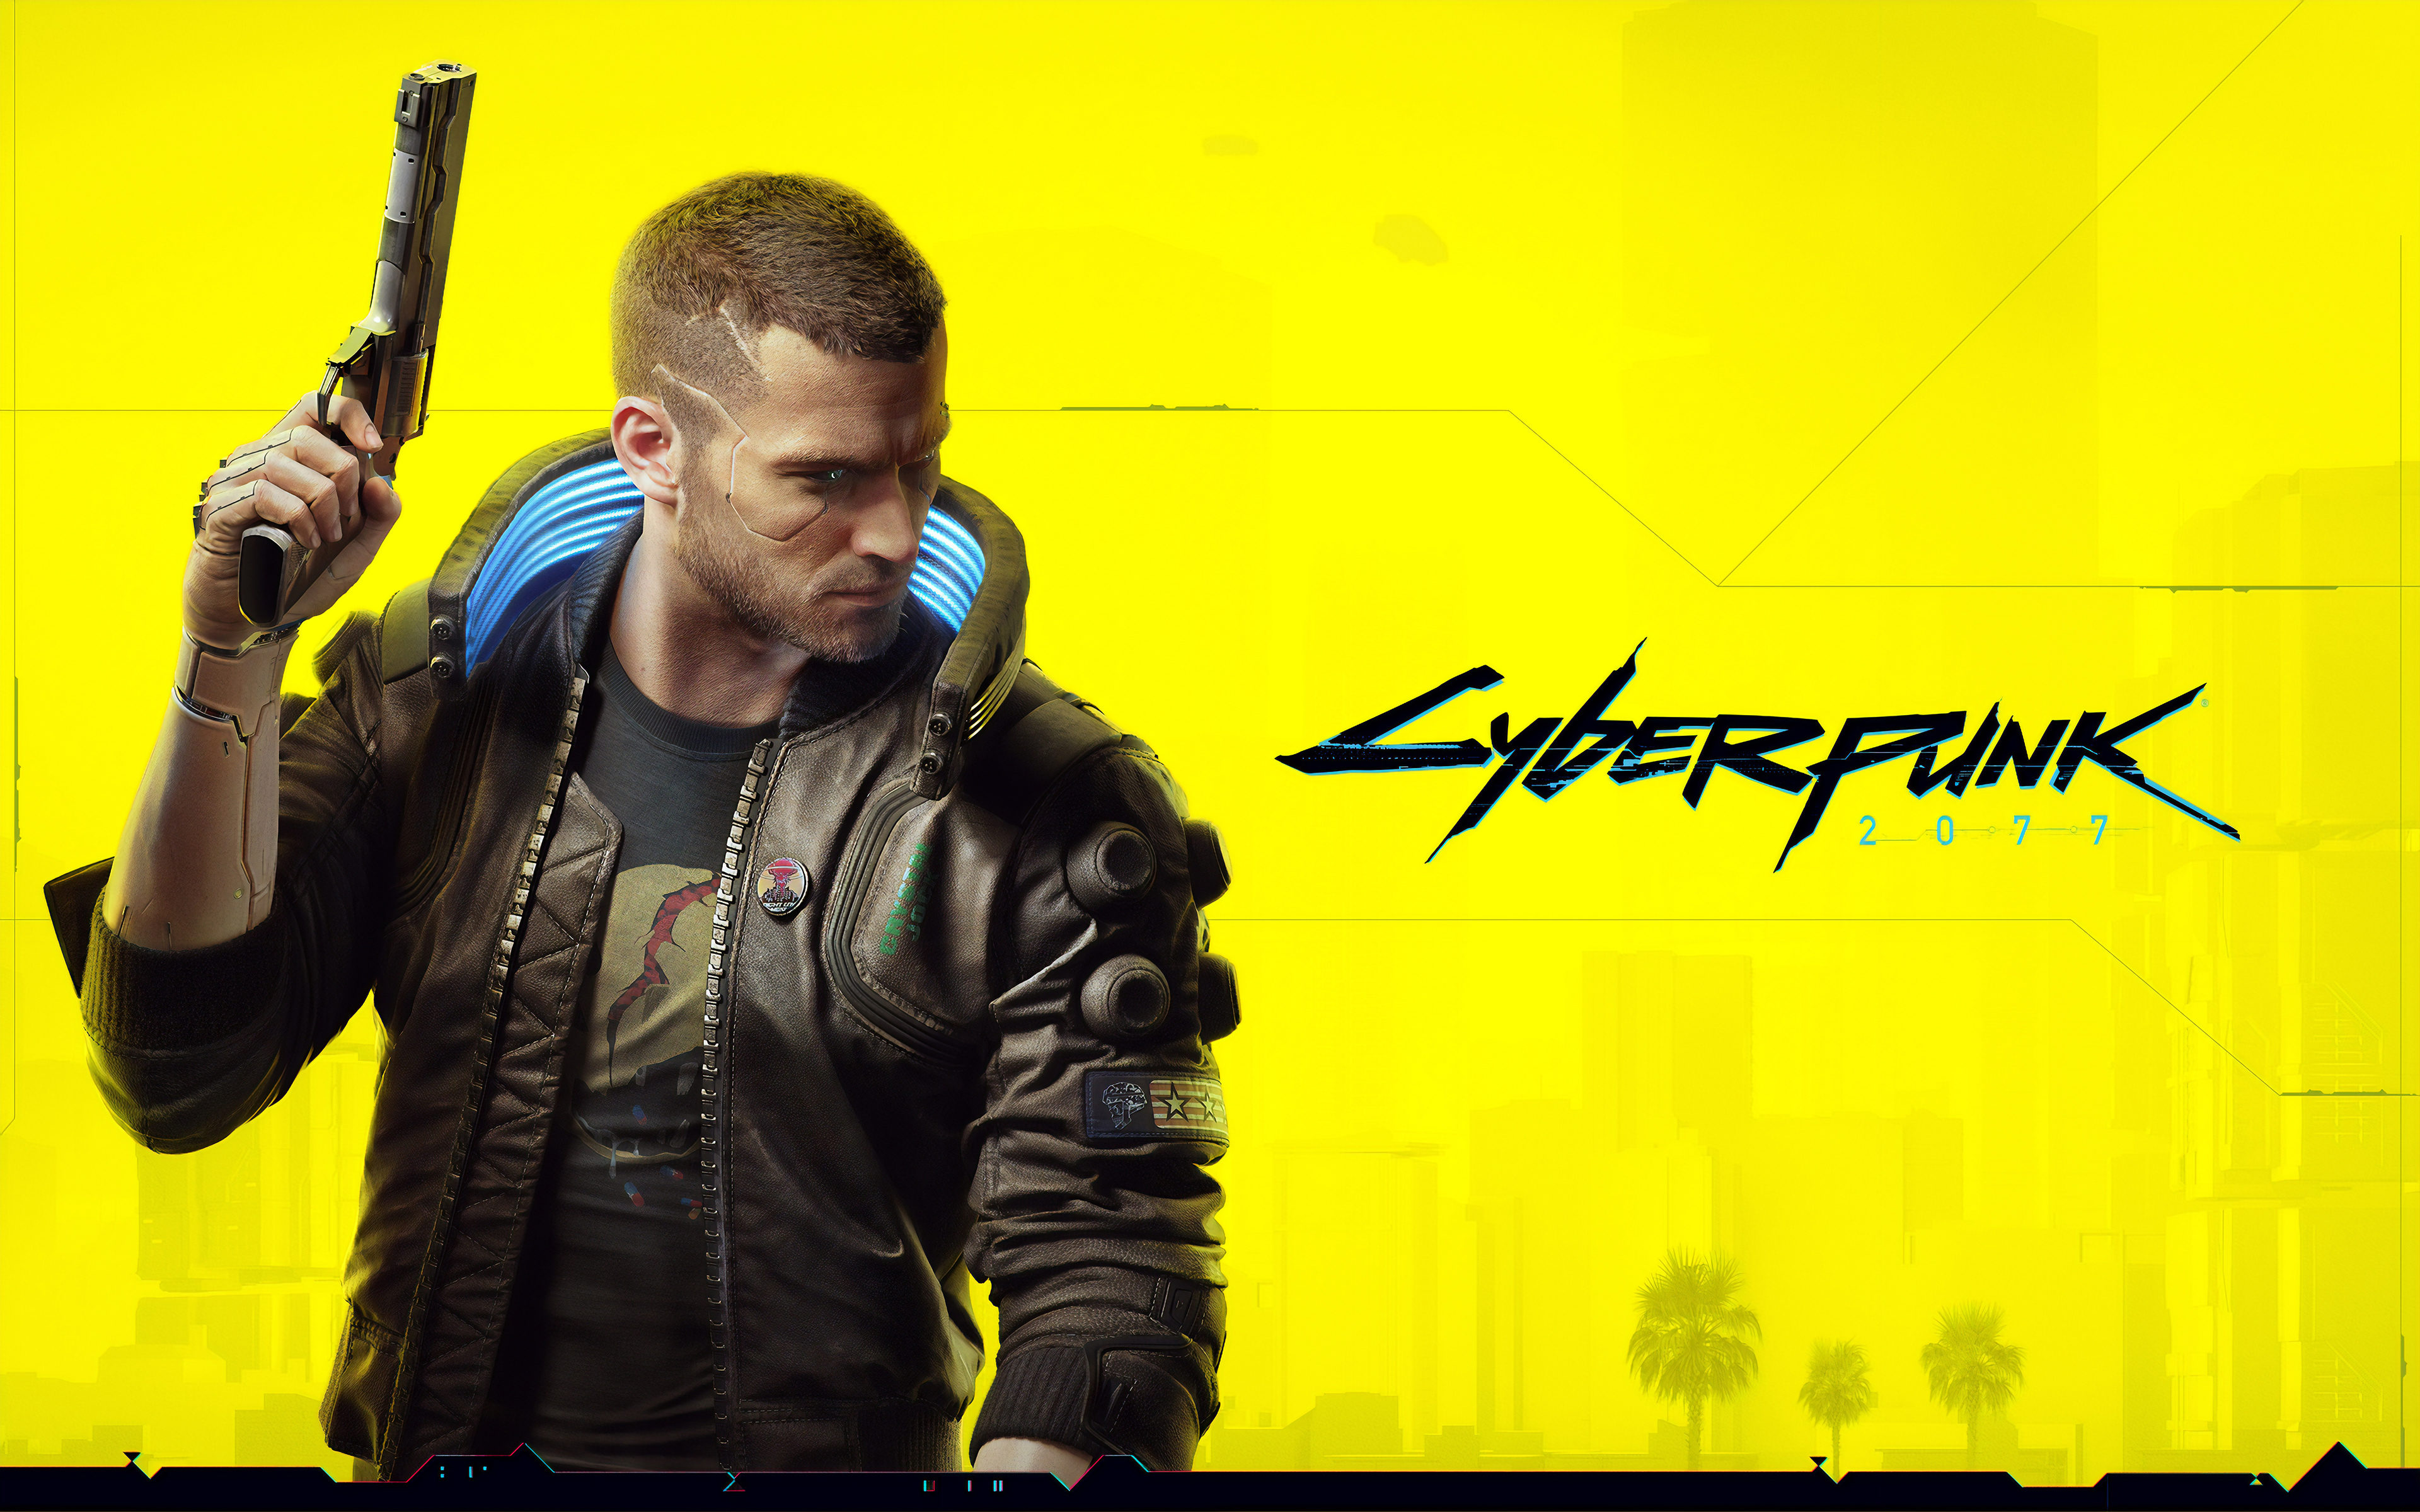 Cyberpunk 2077 2019 4k, HD Games, 4k Wallpapers, Images, Backgrounds